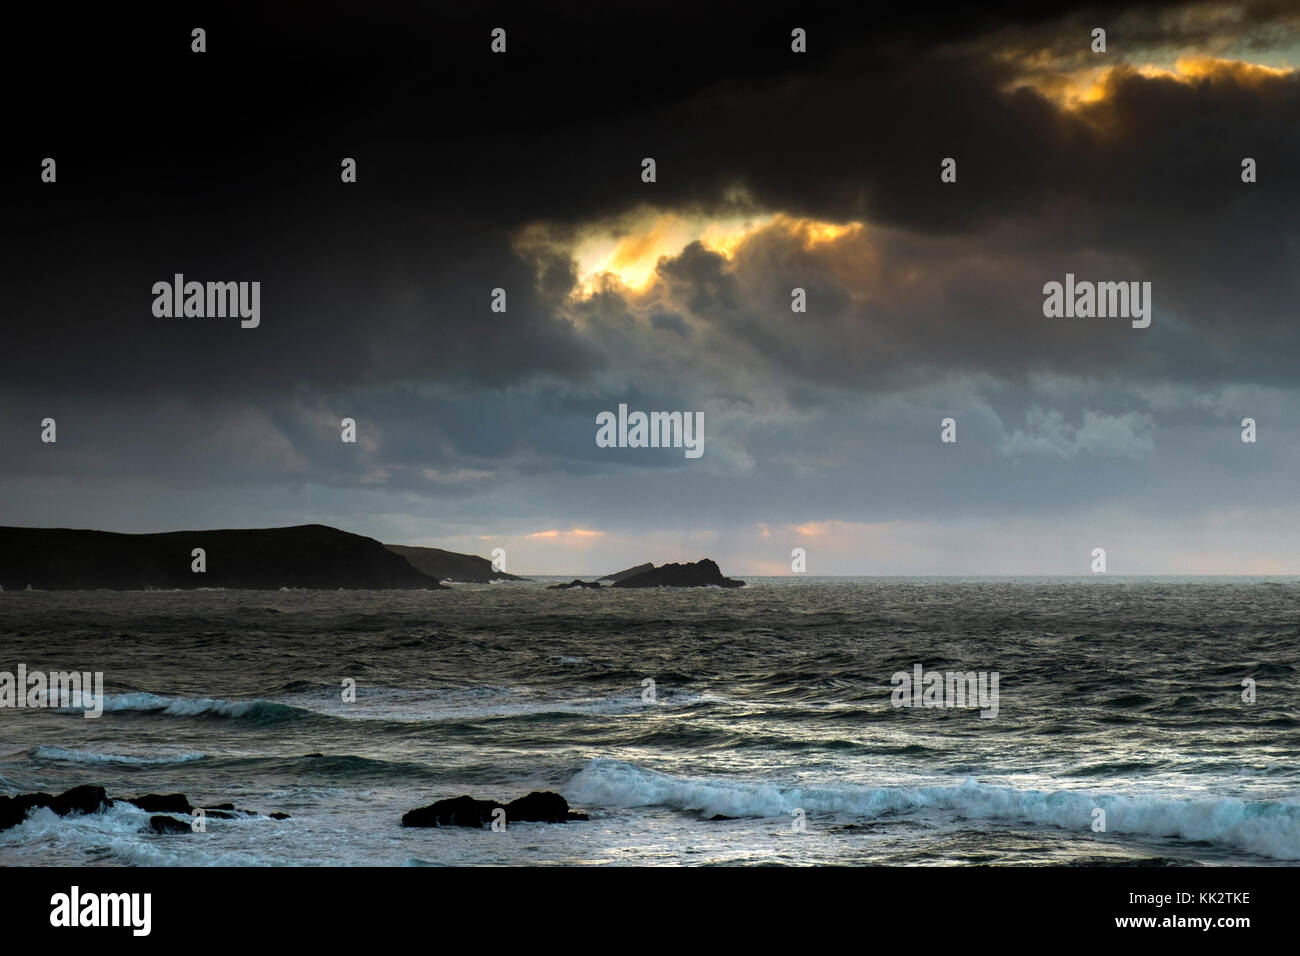 Newquay, UK. 28th Nov, 2017. East Pentire Headland, Newquay, Cornwall. 28th November, 2017. UK weather. As the sun sets ominous heavy rain clouds approach East Pentire Headland on the North Cornwall coast Photographer Credit: Gordon Scammell/Alamy Live News Stock Photo